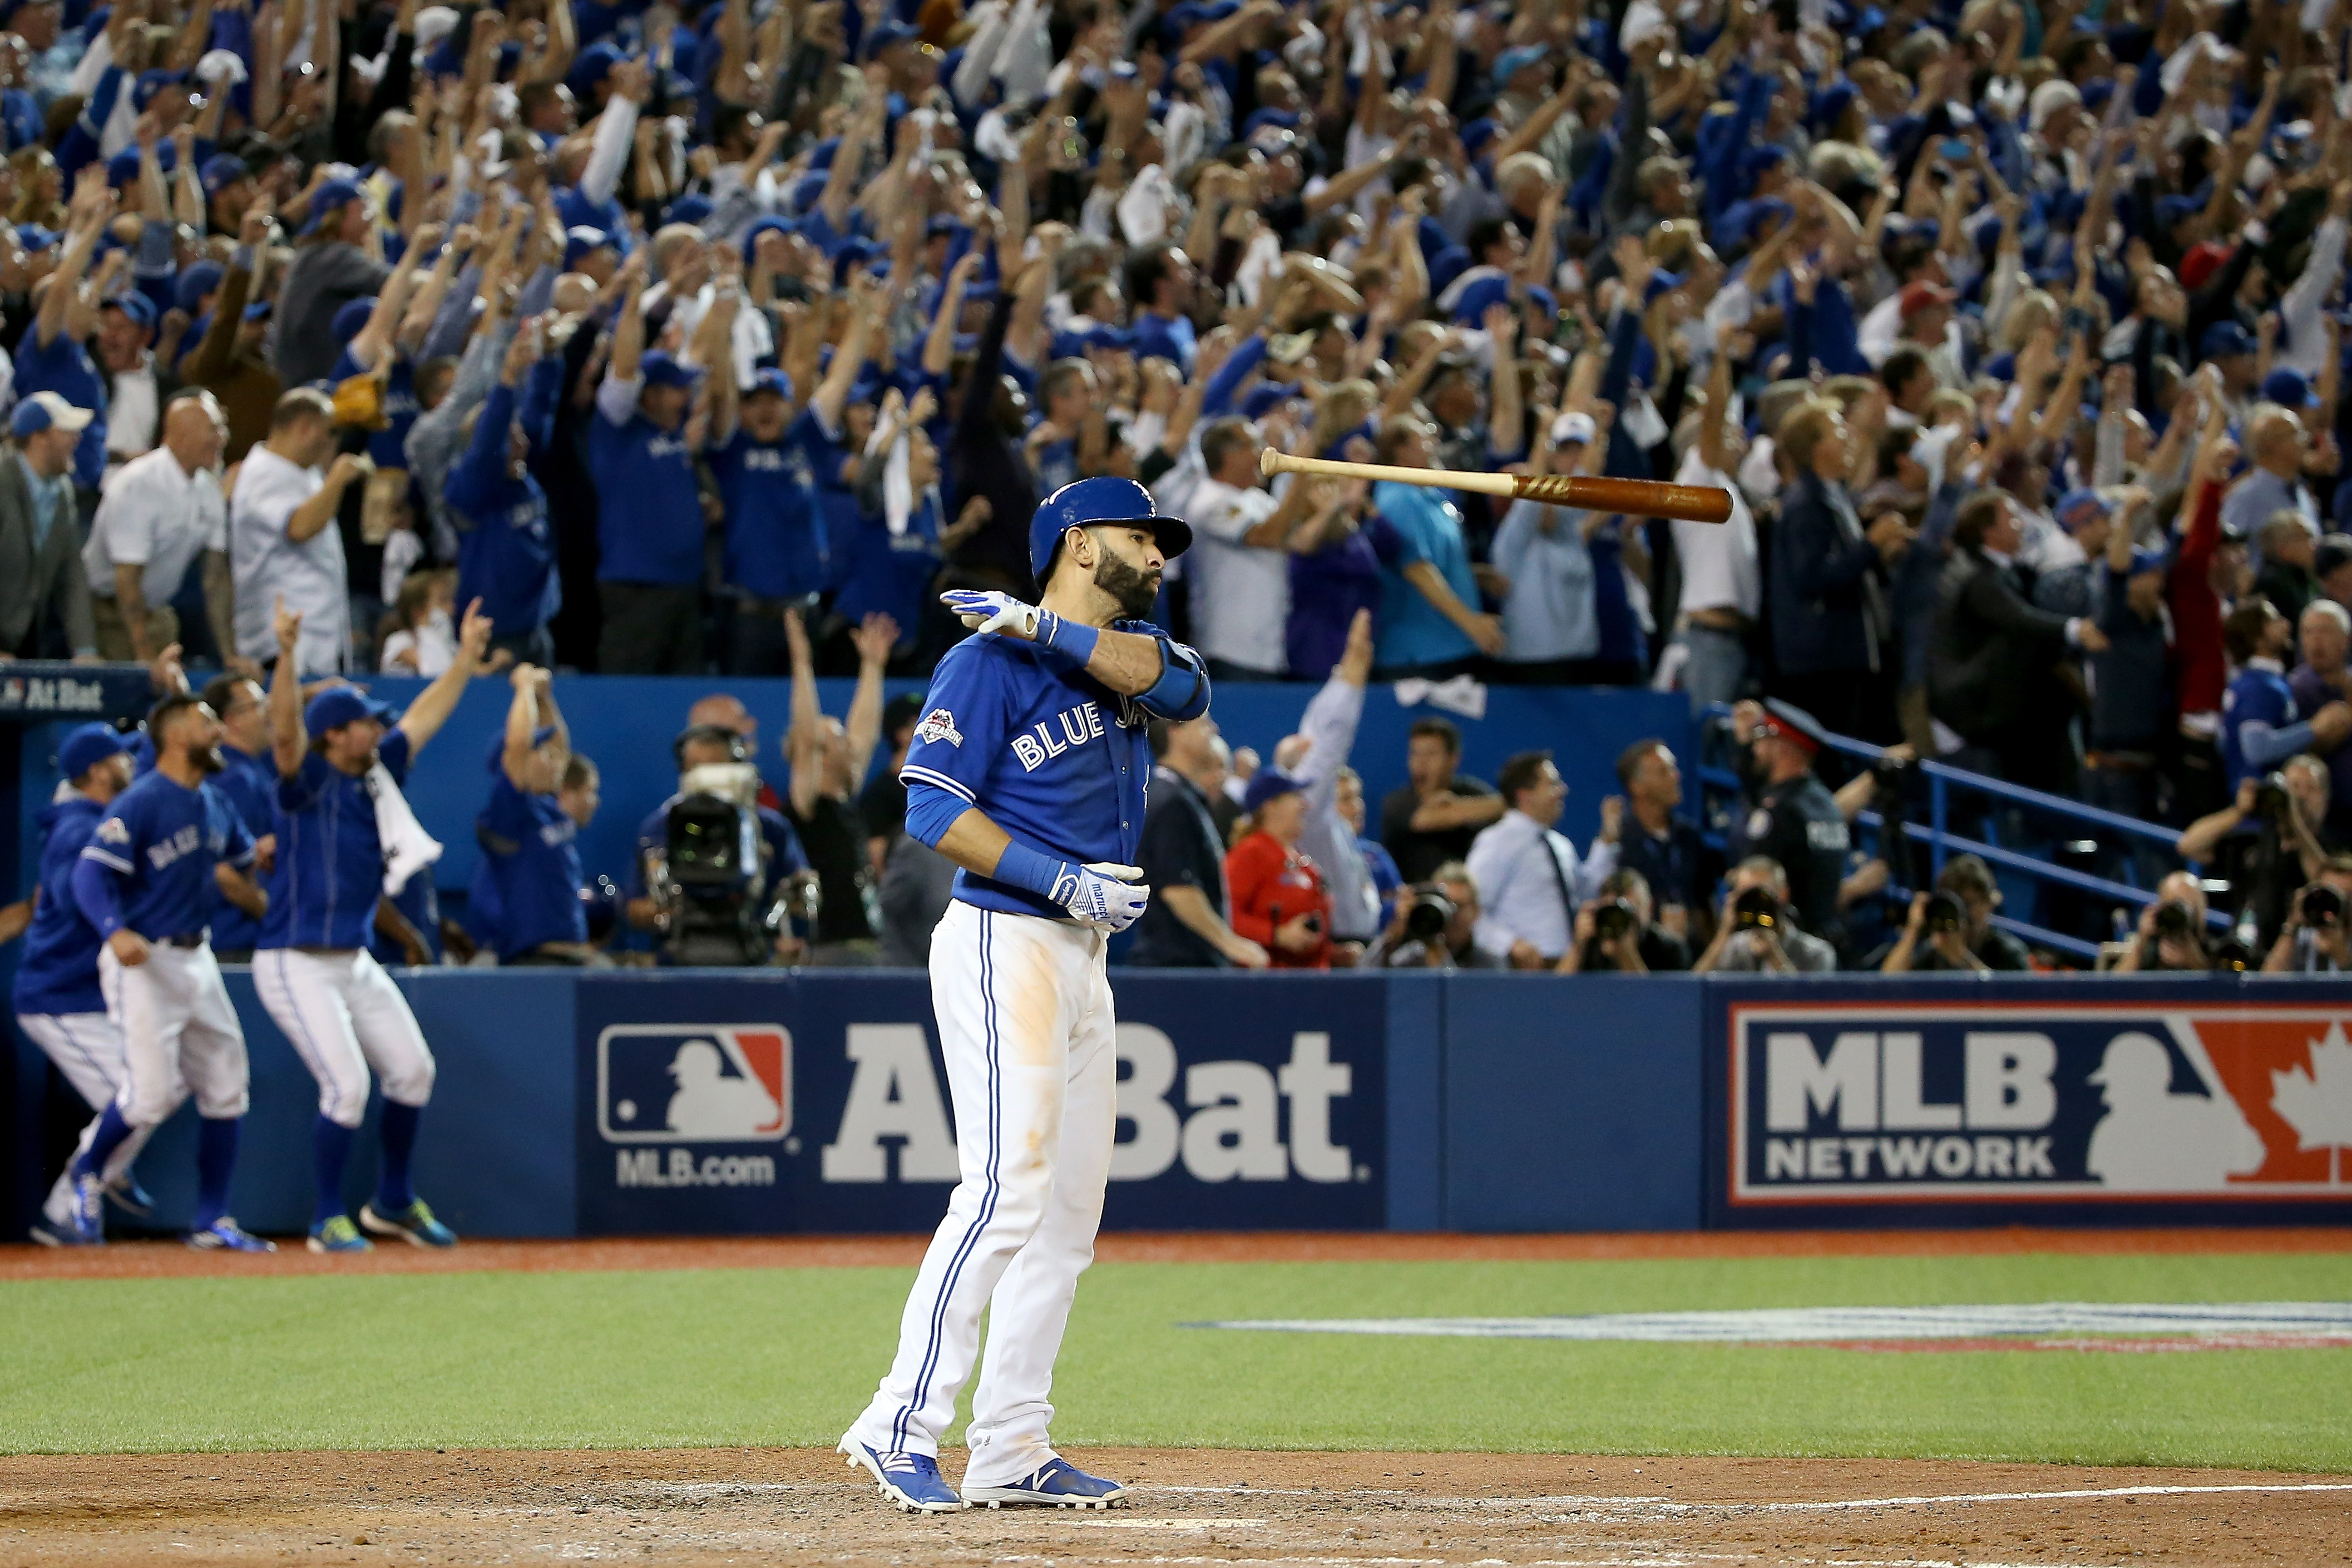 Jose Bautista of the Toronto Blue Jays flips his bat up in the air after he hits a three-run home run in the seventh inning against the Texas Rangers in game five of the American League Division Series at Rogers Centre on October 14, 2015 in Toronto, Canada. (Getty Images&mdash;2015 Getty Images)